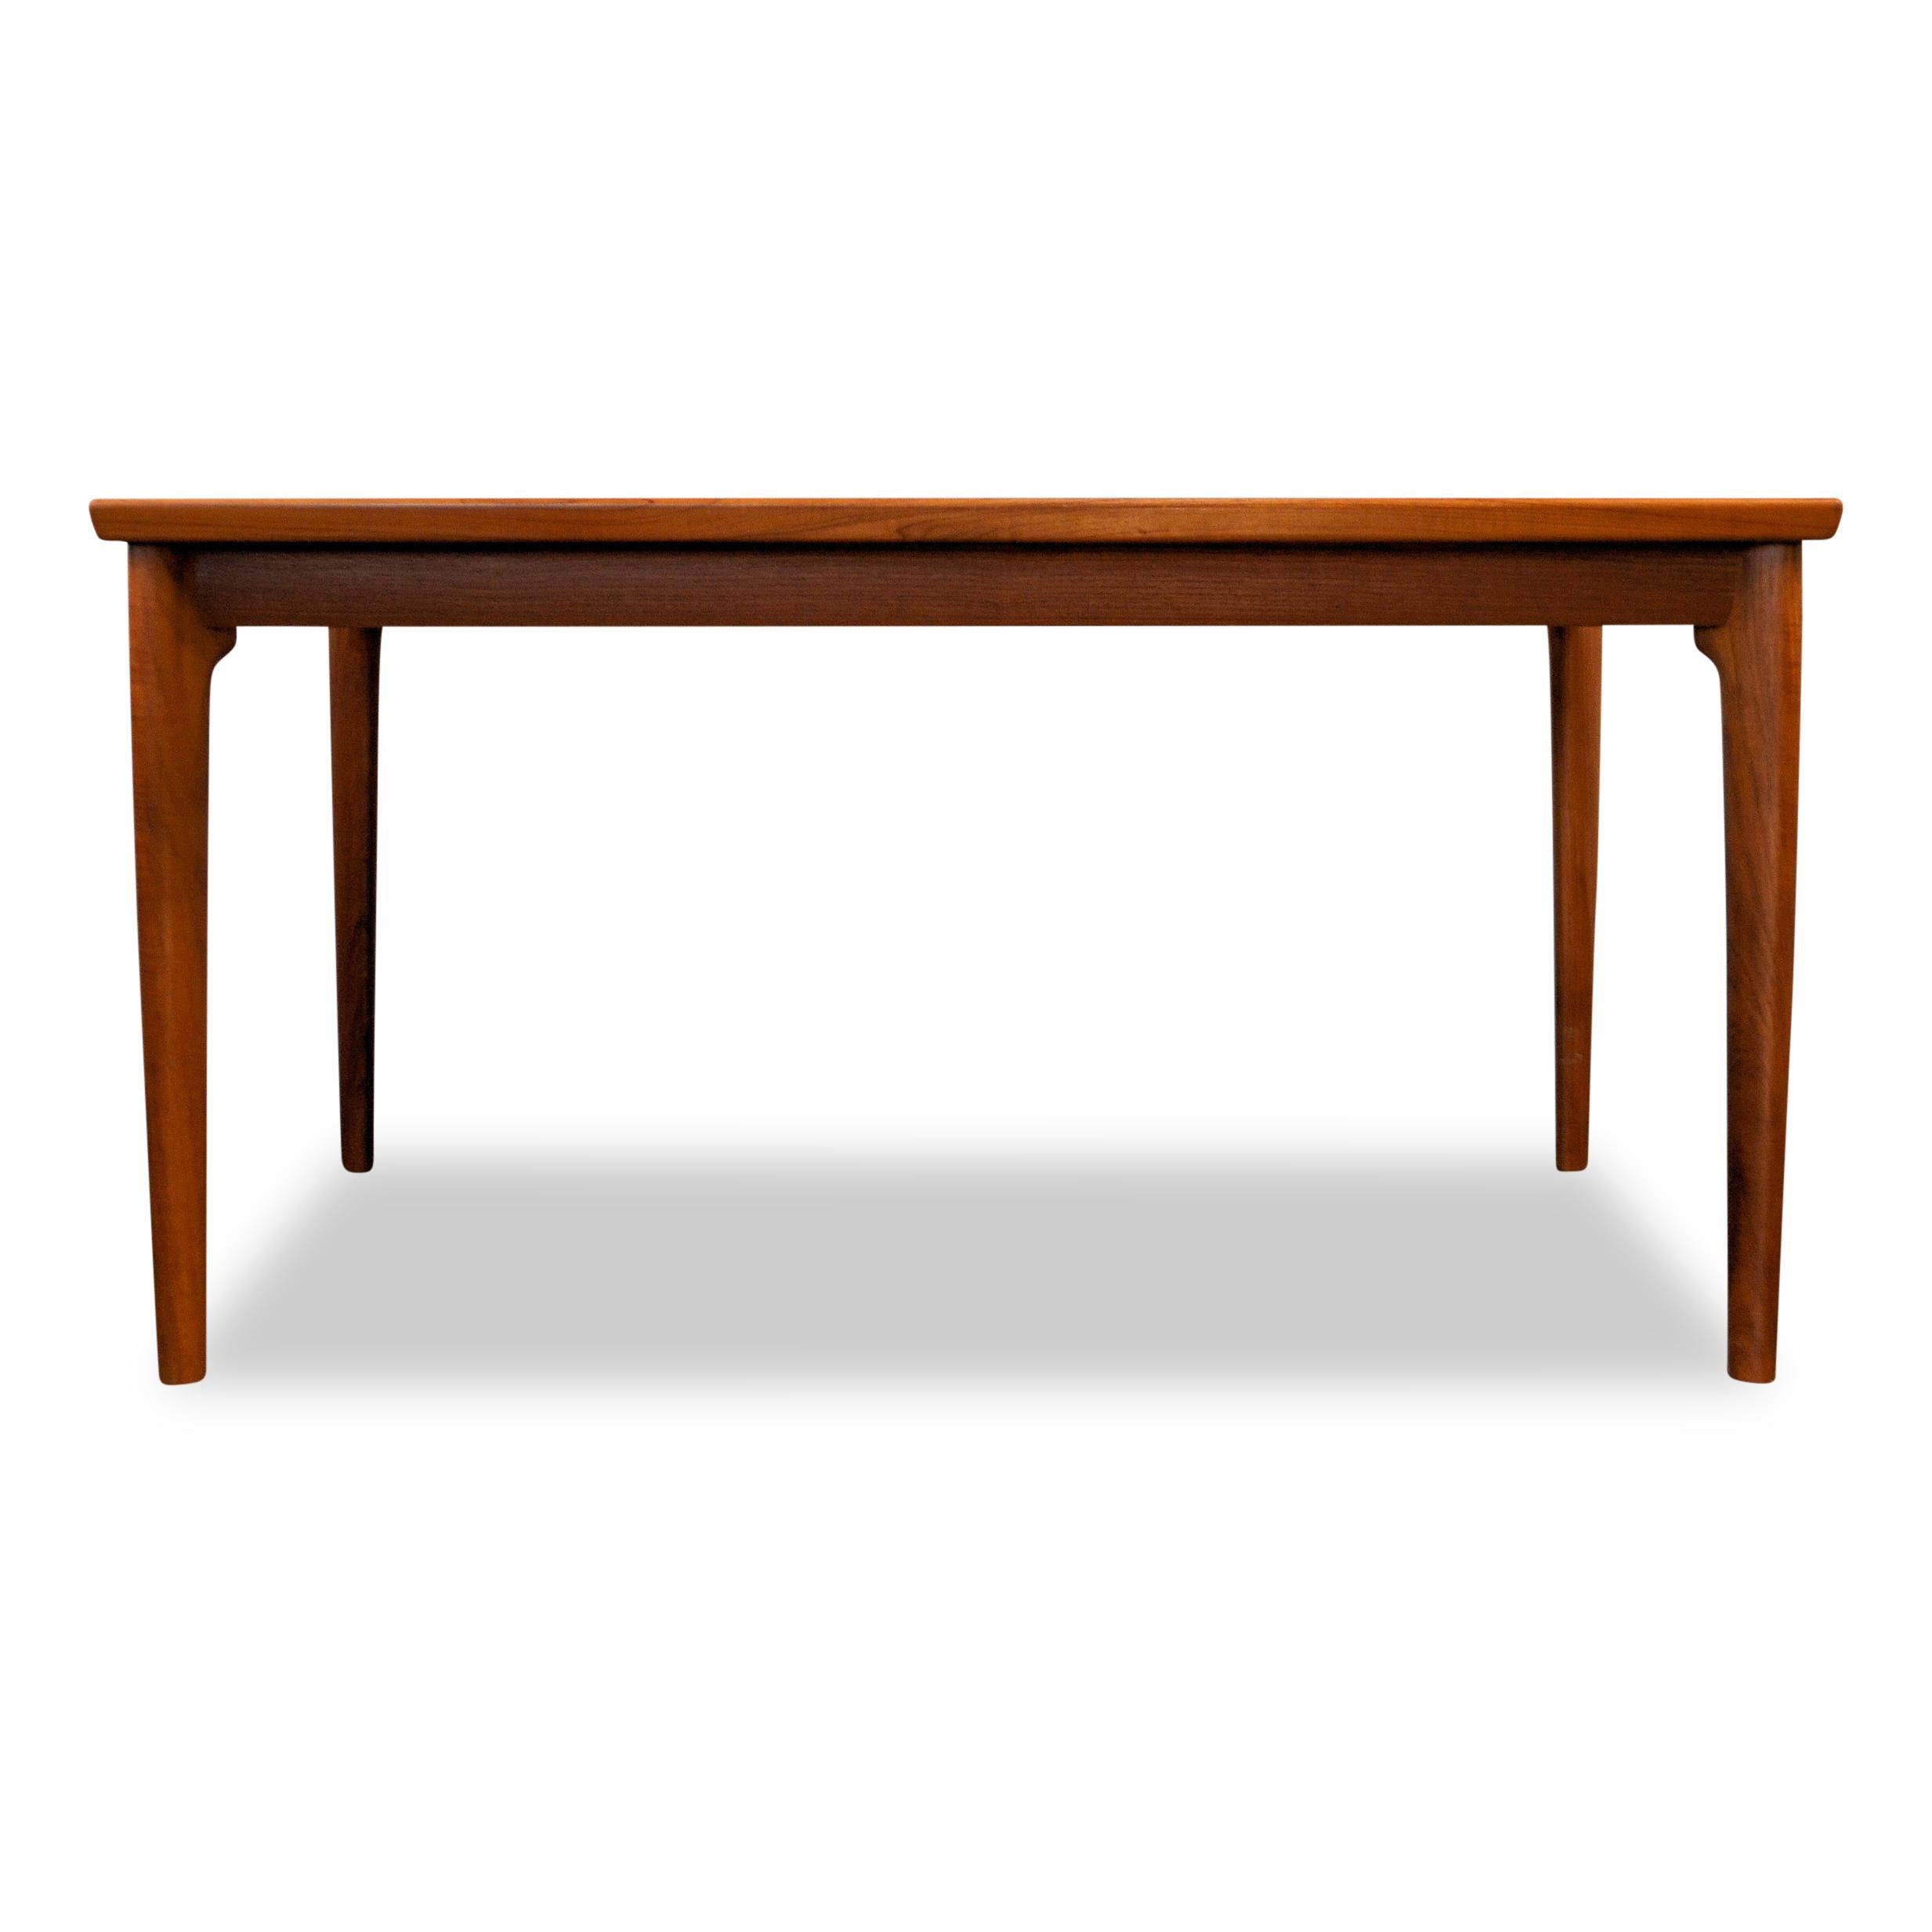 Mid-Century Modern Danish design extendable teak dining table designed by Grete Jalk for Glostrup during the 1960s.